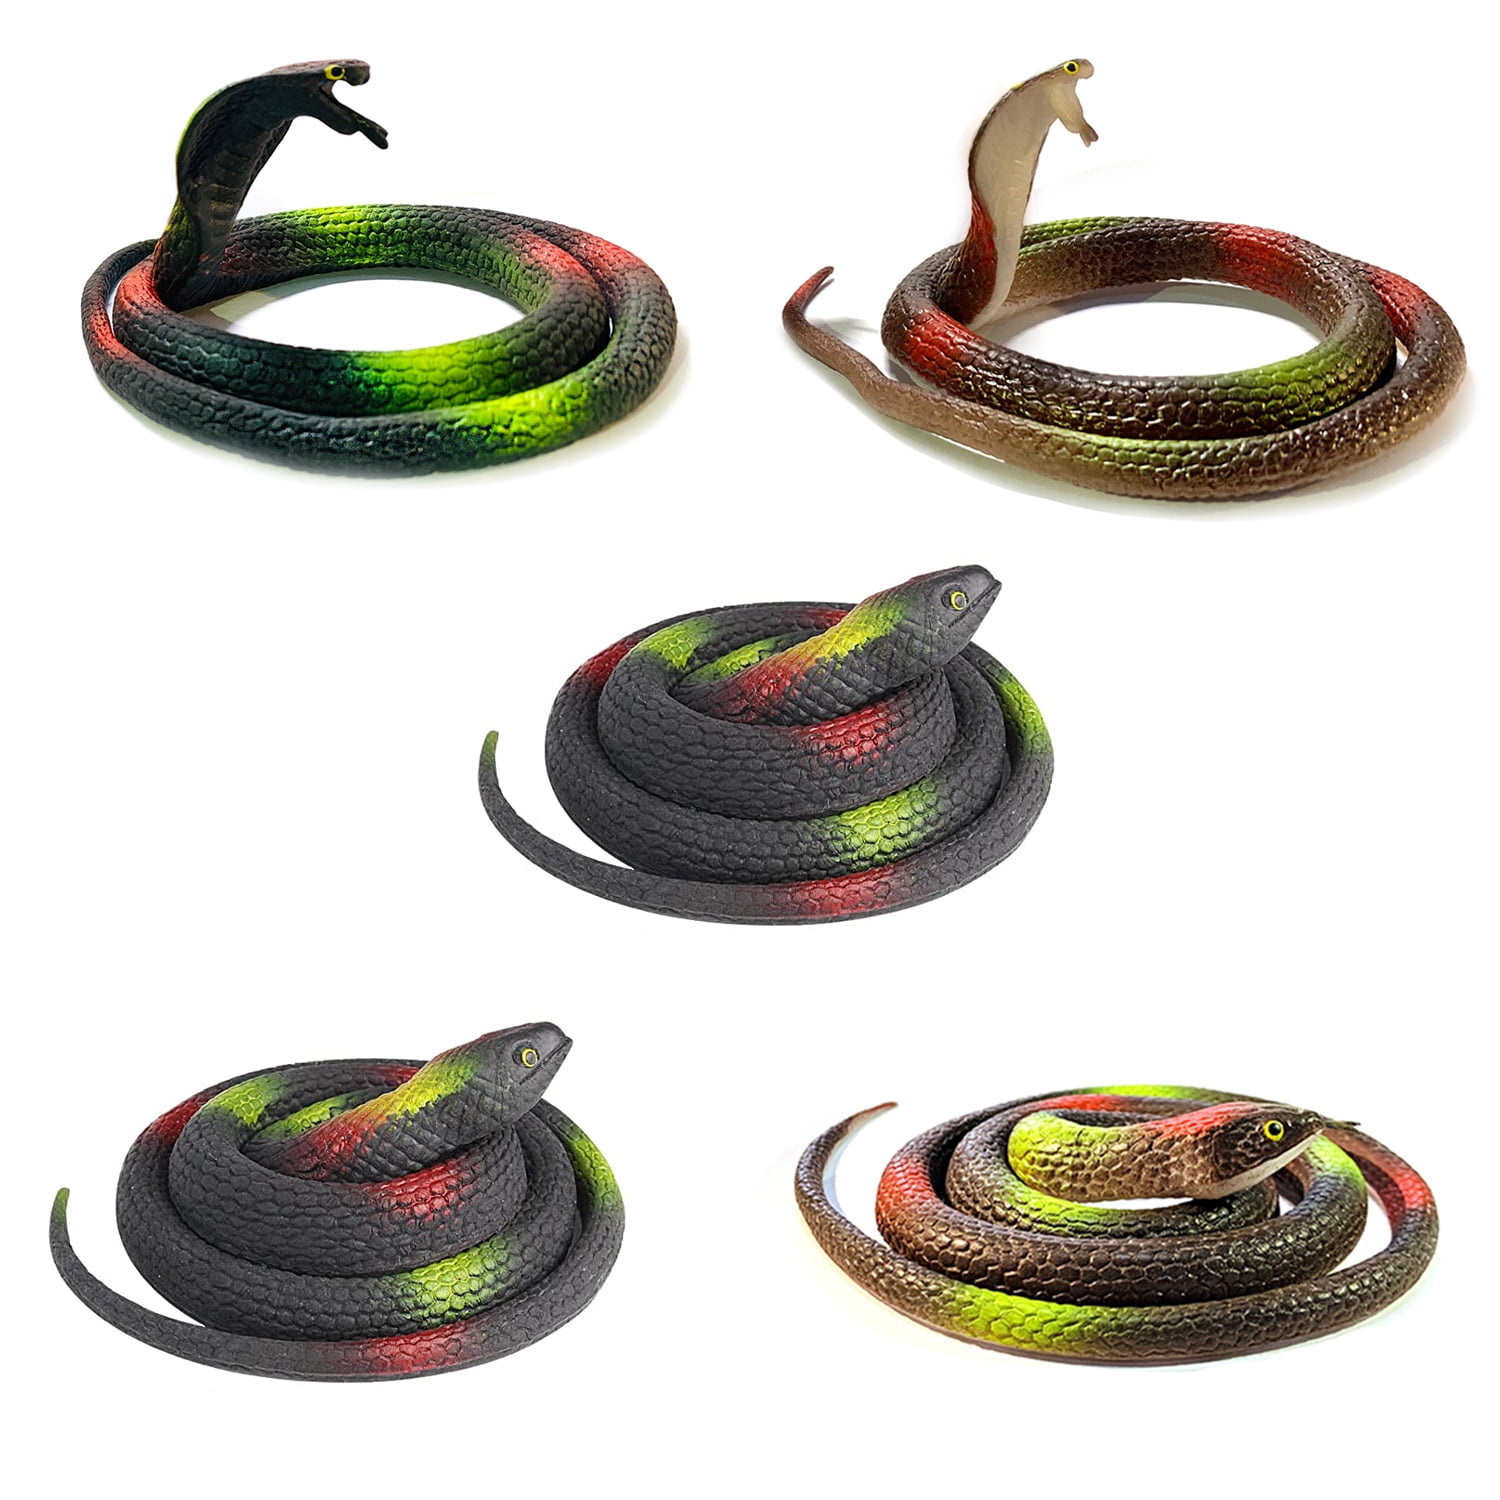 5 Pieces Rubber Snakes Realistic Fake Snakes Black Snake Toys for ...